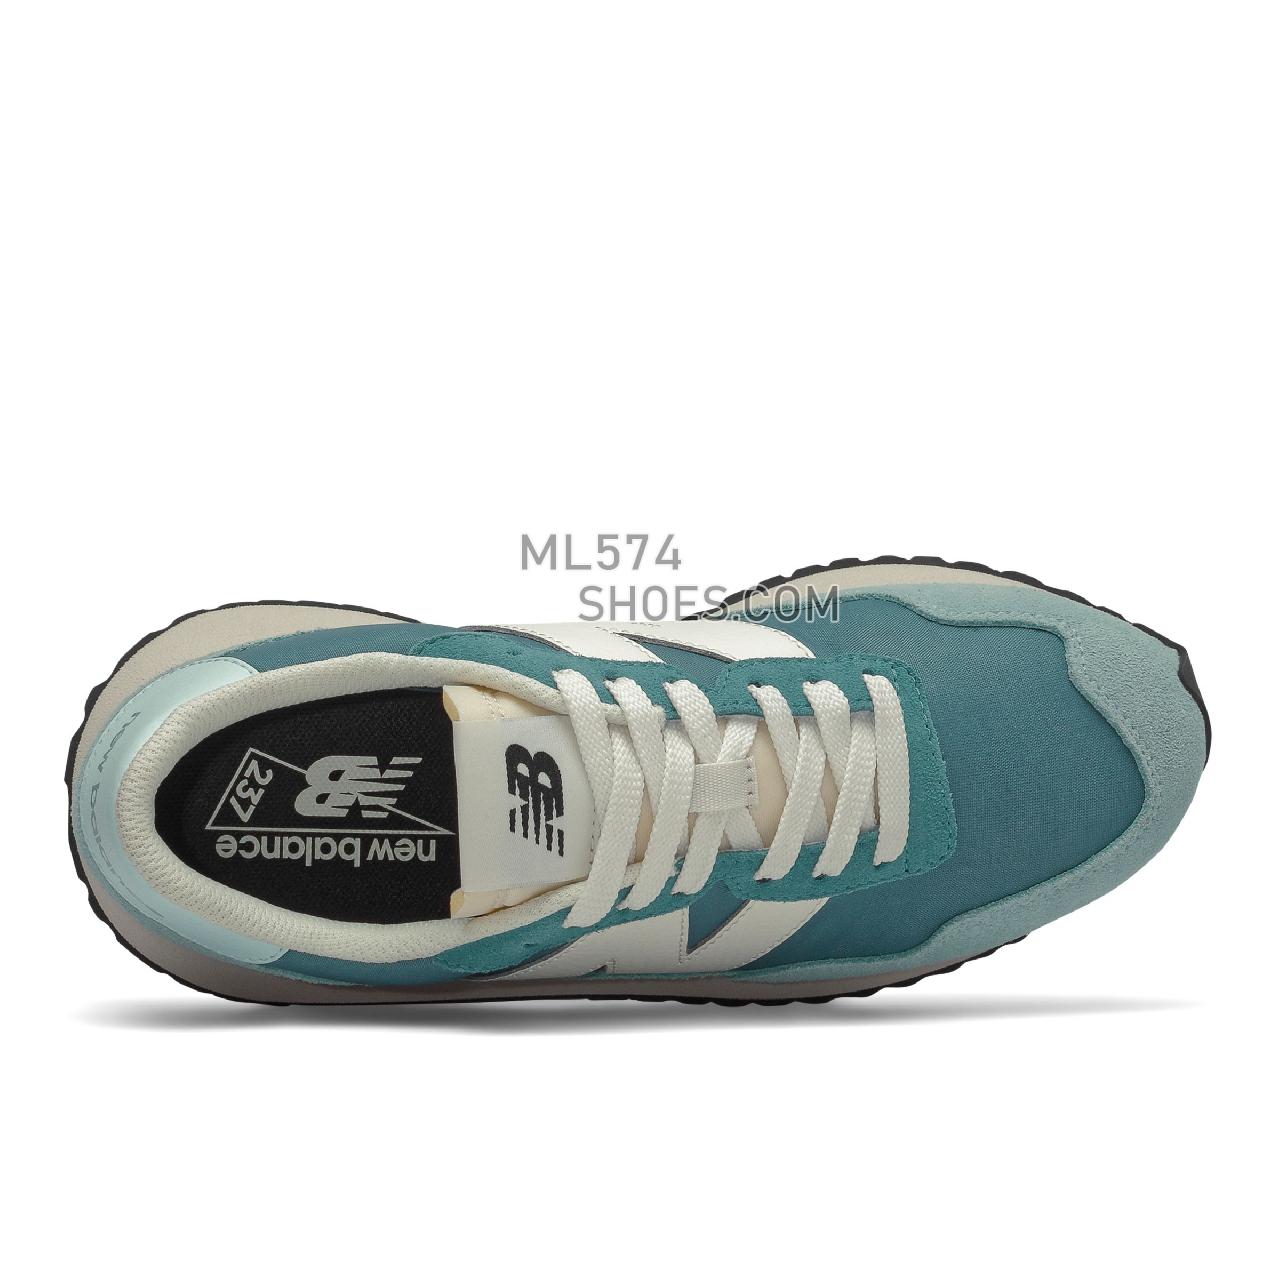 New Balance 237 - Women's Sport Style Sneakers - Deep Sea with Storm Blue - WS237DI1